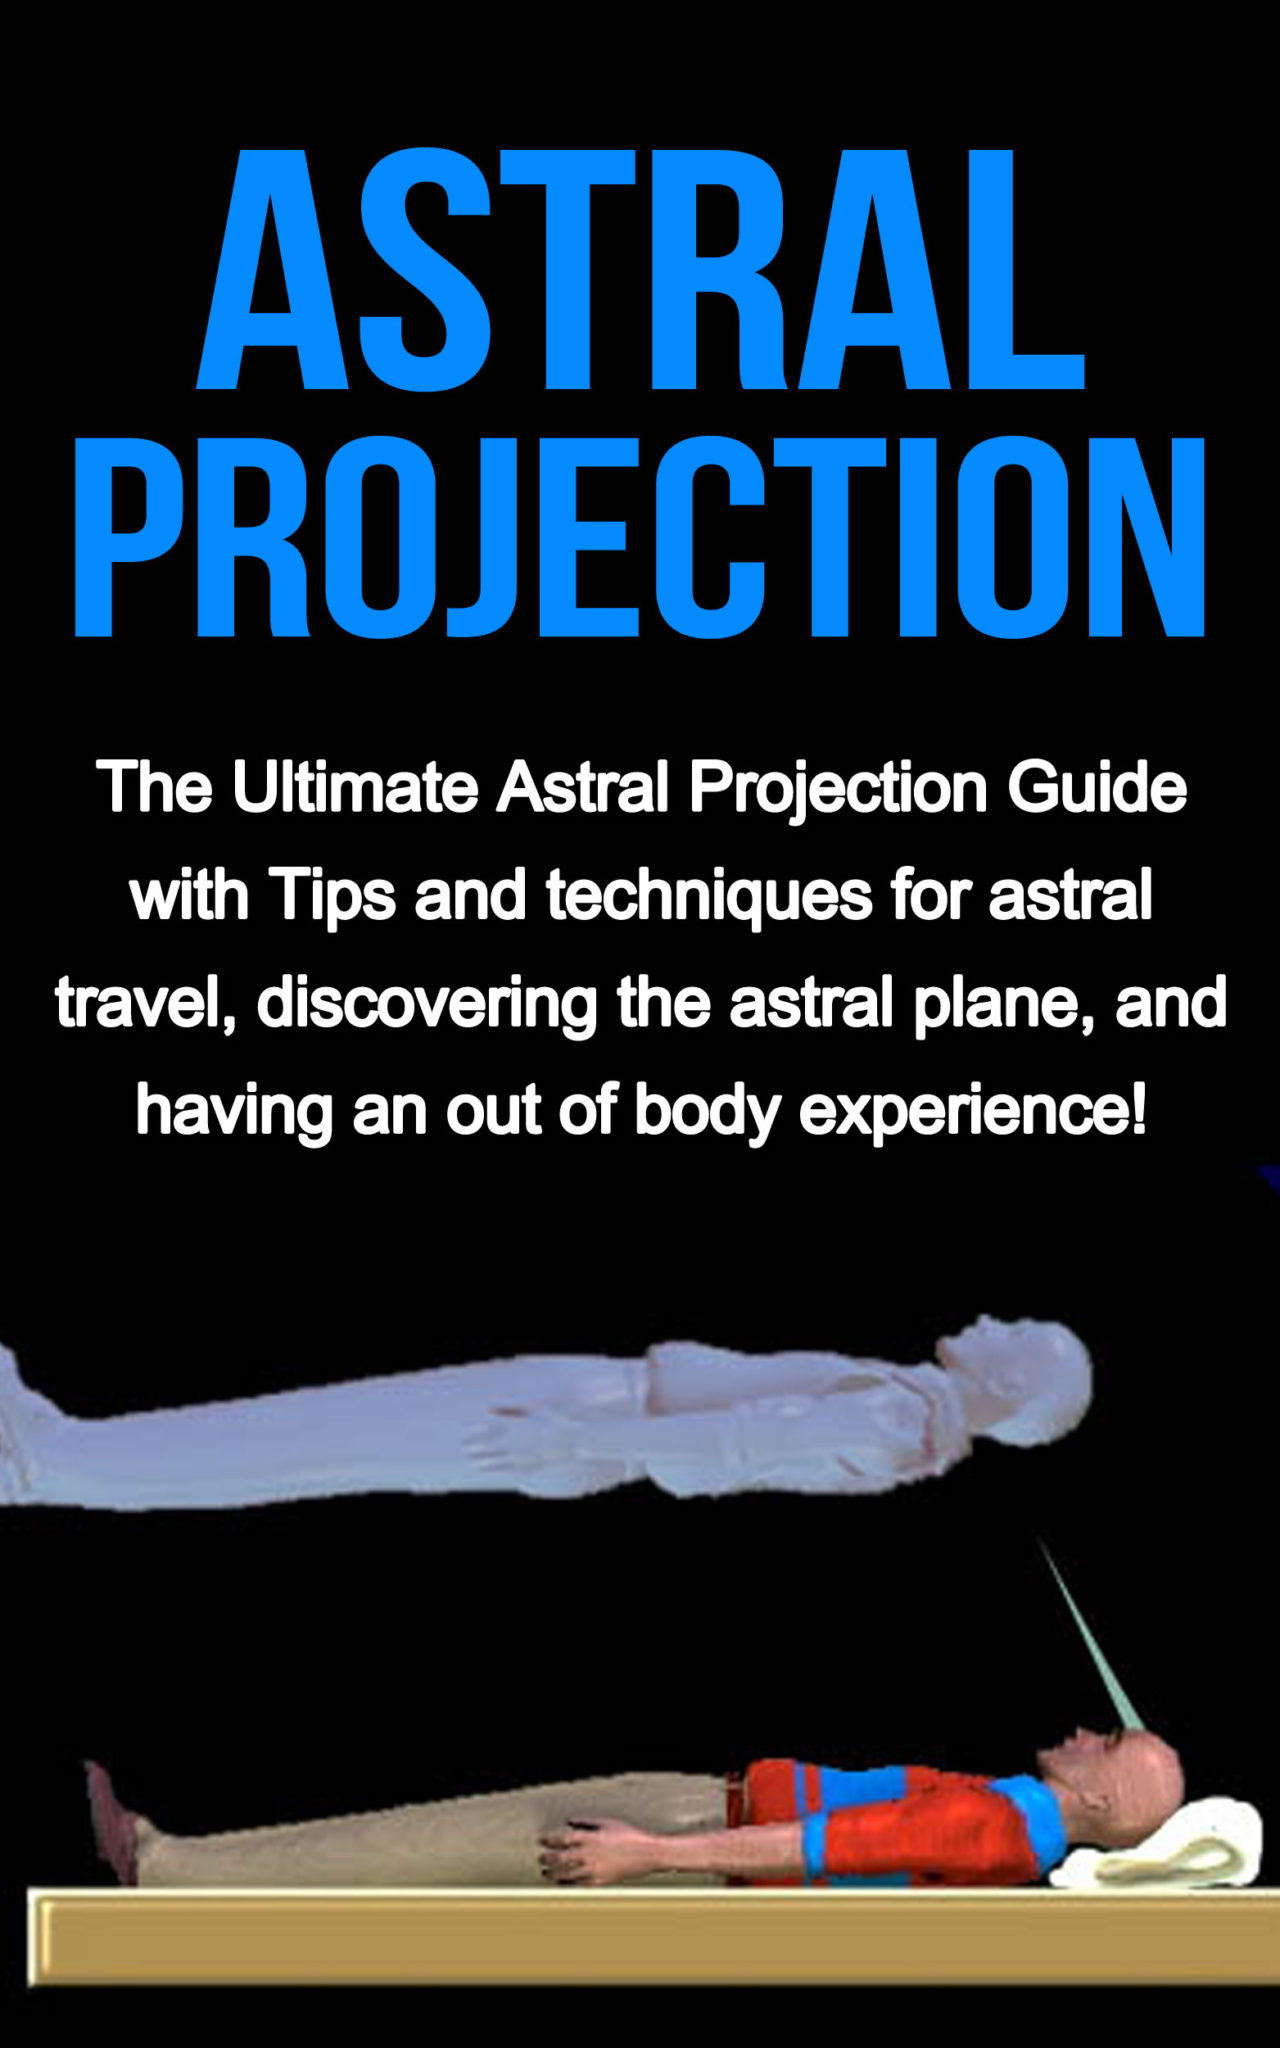 FREE: Astral Projection: The ultimate astral projection guide with tips and techniques for astral travel, discovering the astral plane, and having an out of body experience! by Peter Longley